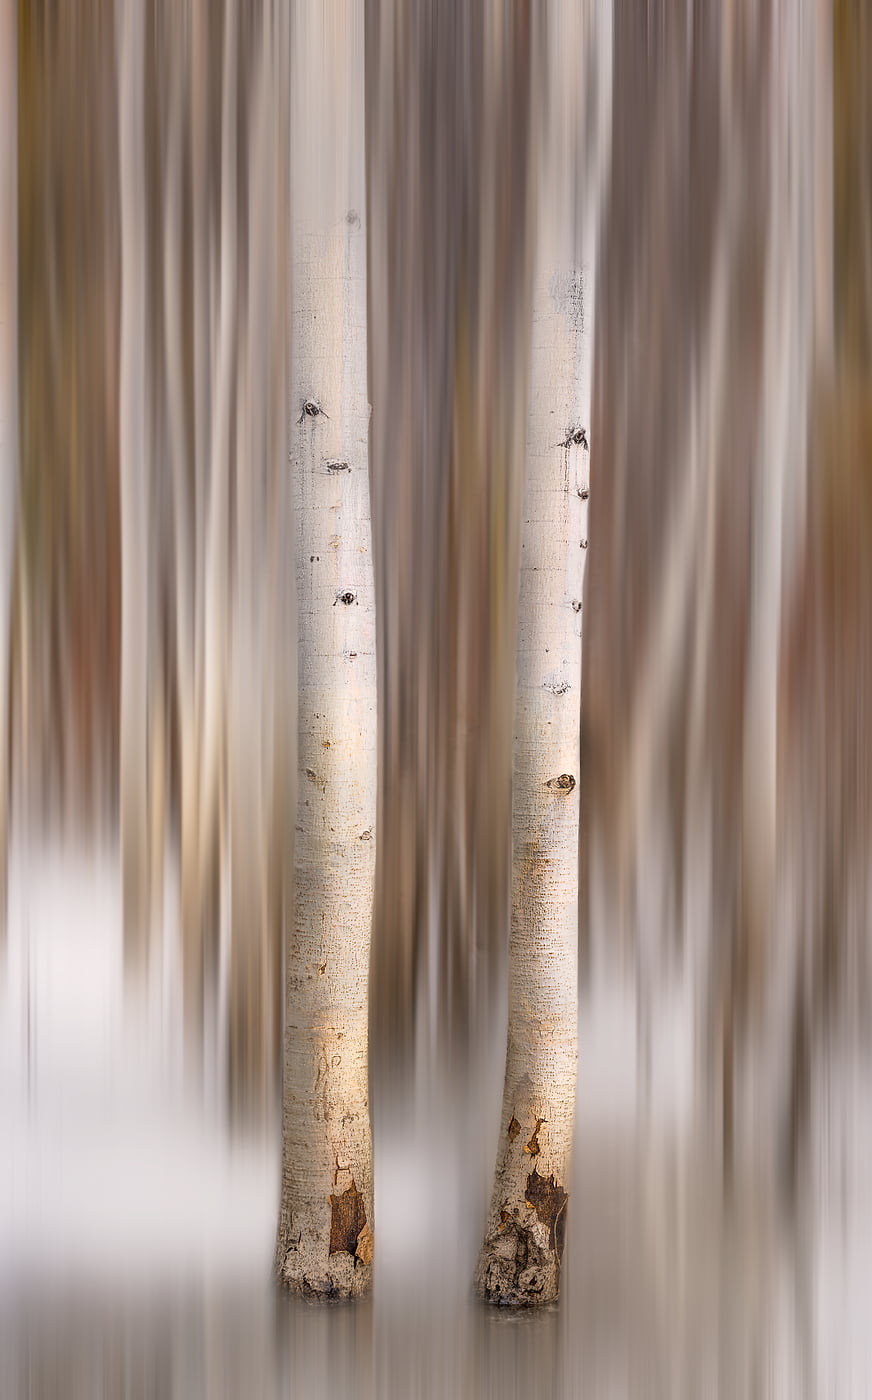 334 megapixels! A very high resolution, abstract artwork of aspen trees; created by Francesco Emanuele Carucci